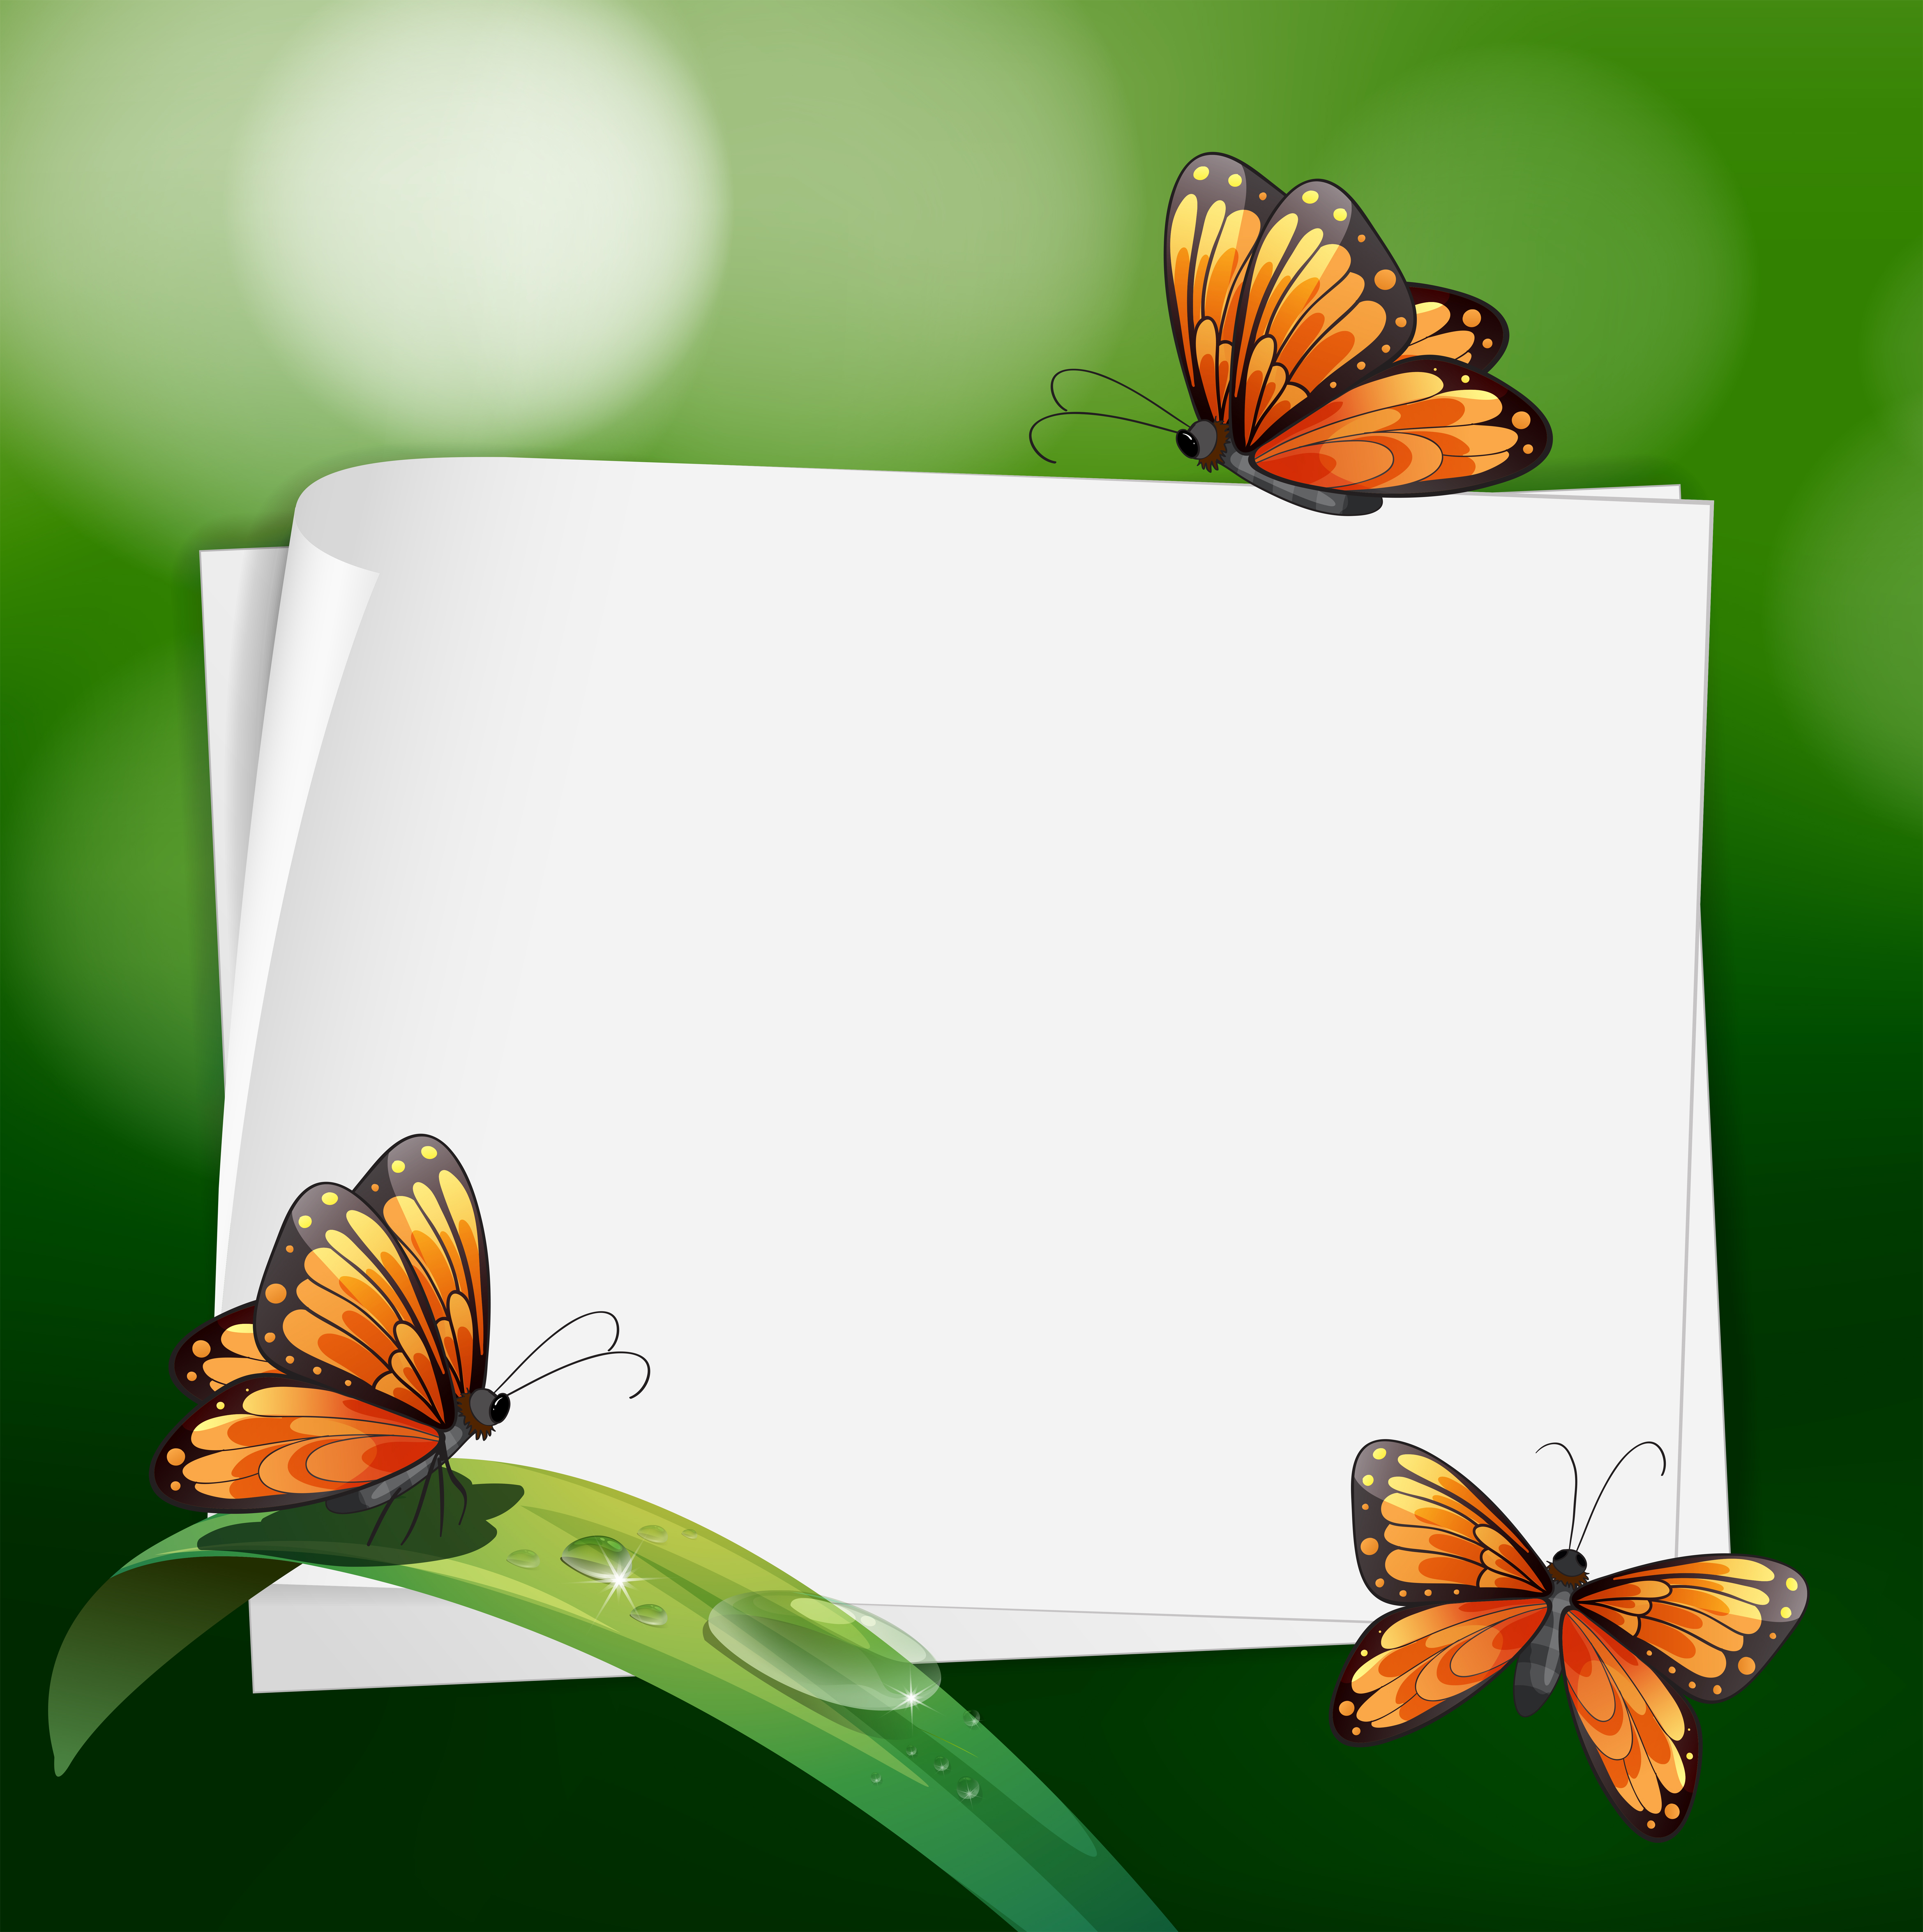 Download Border design with butterflies on leaf - Download Free ...